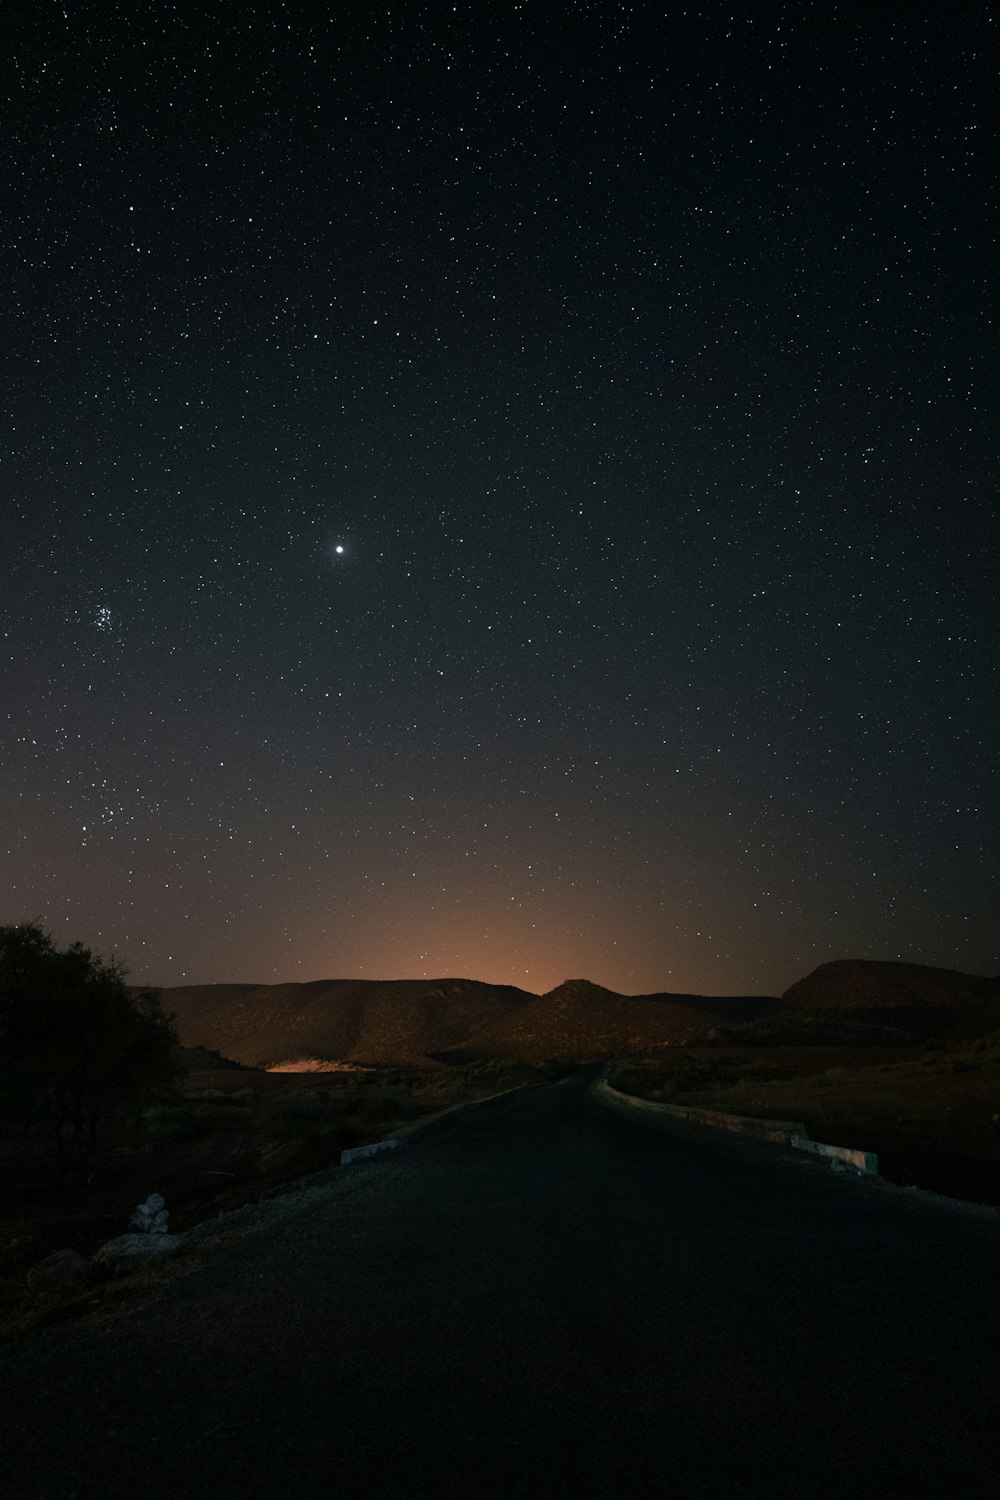 the night sky with stars above a road